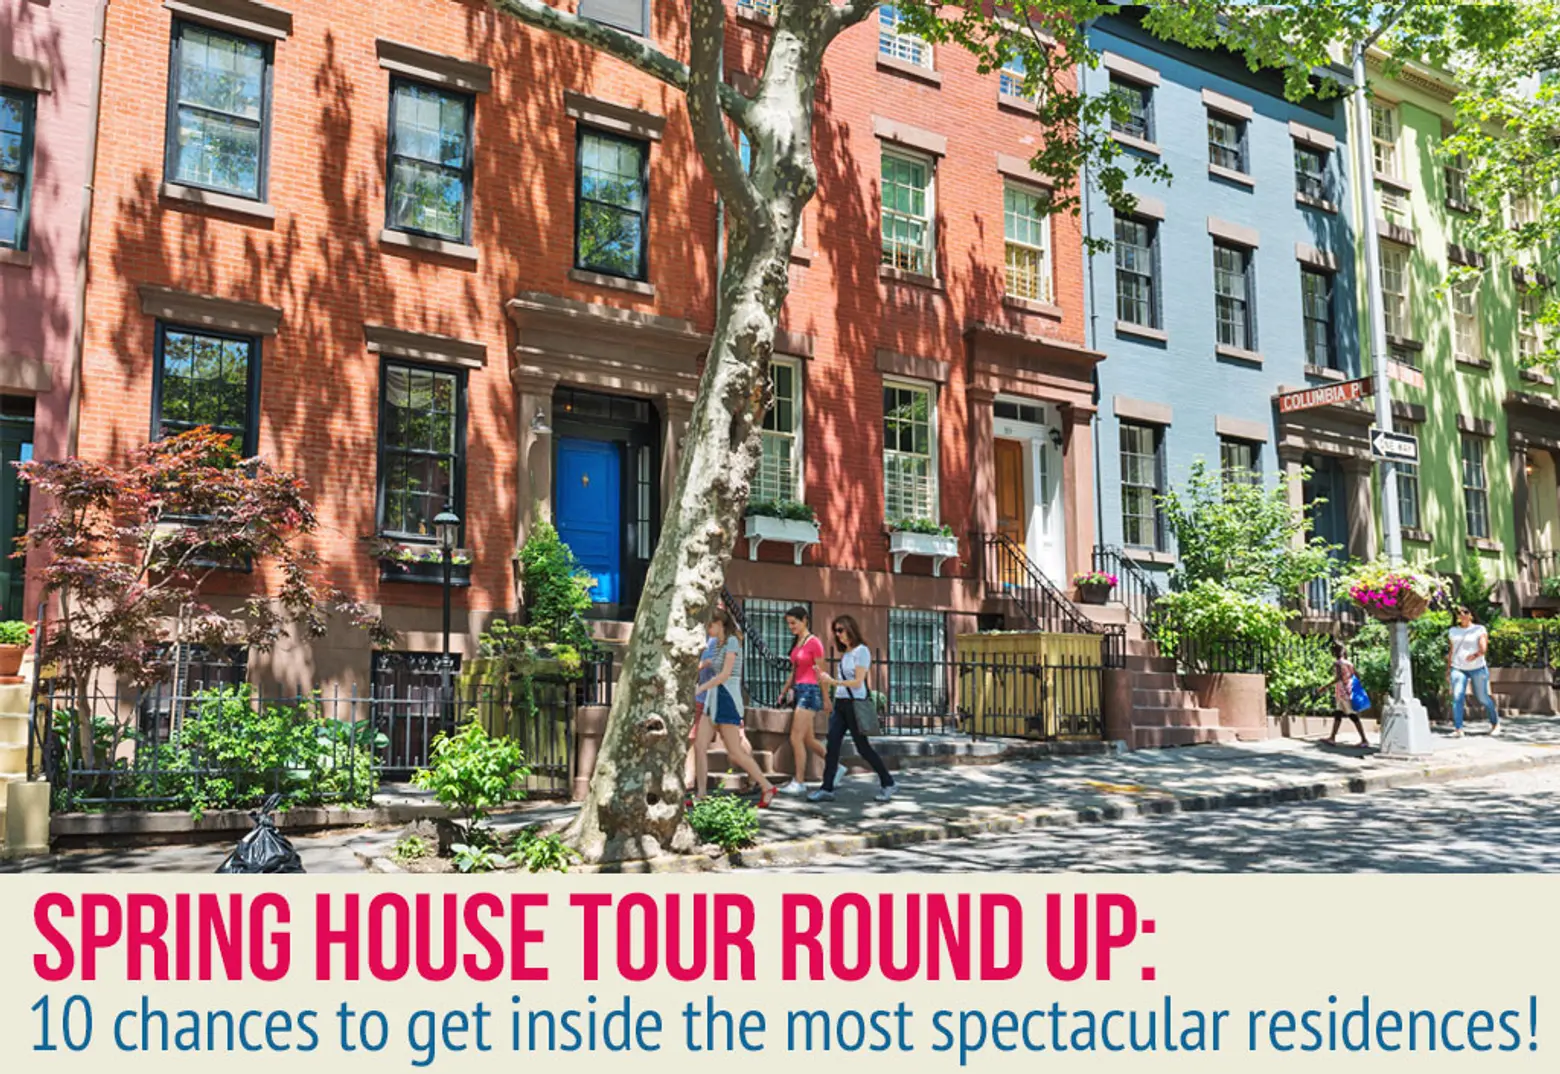 Spring House Tour Round Up: 10 Chances to Get Inside the Most Spectacular Residences!